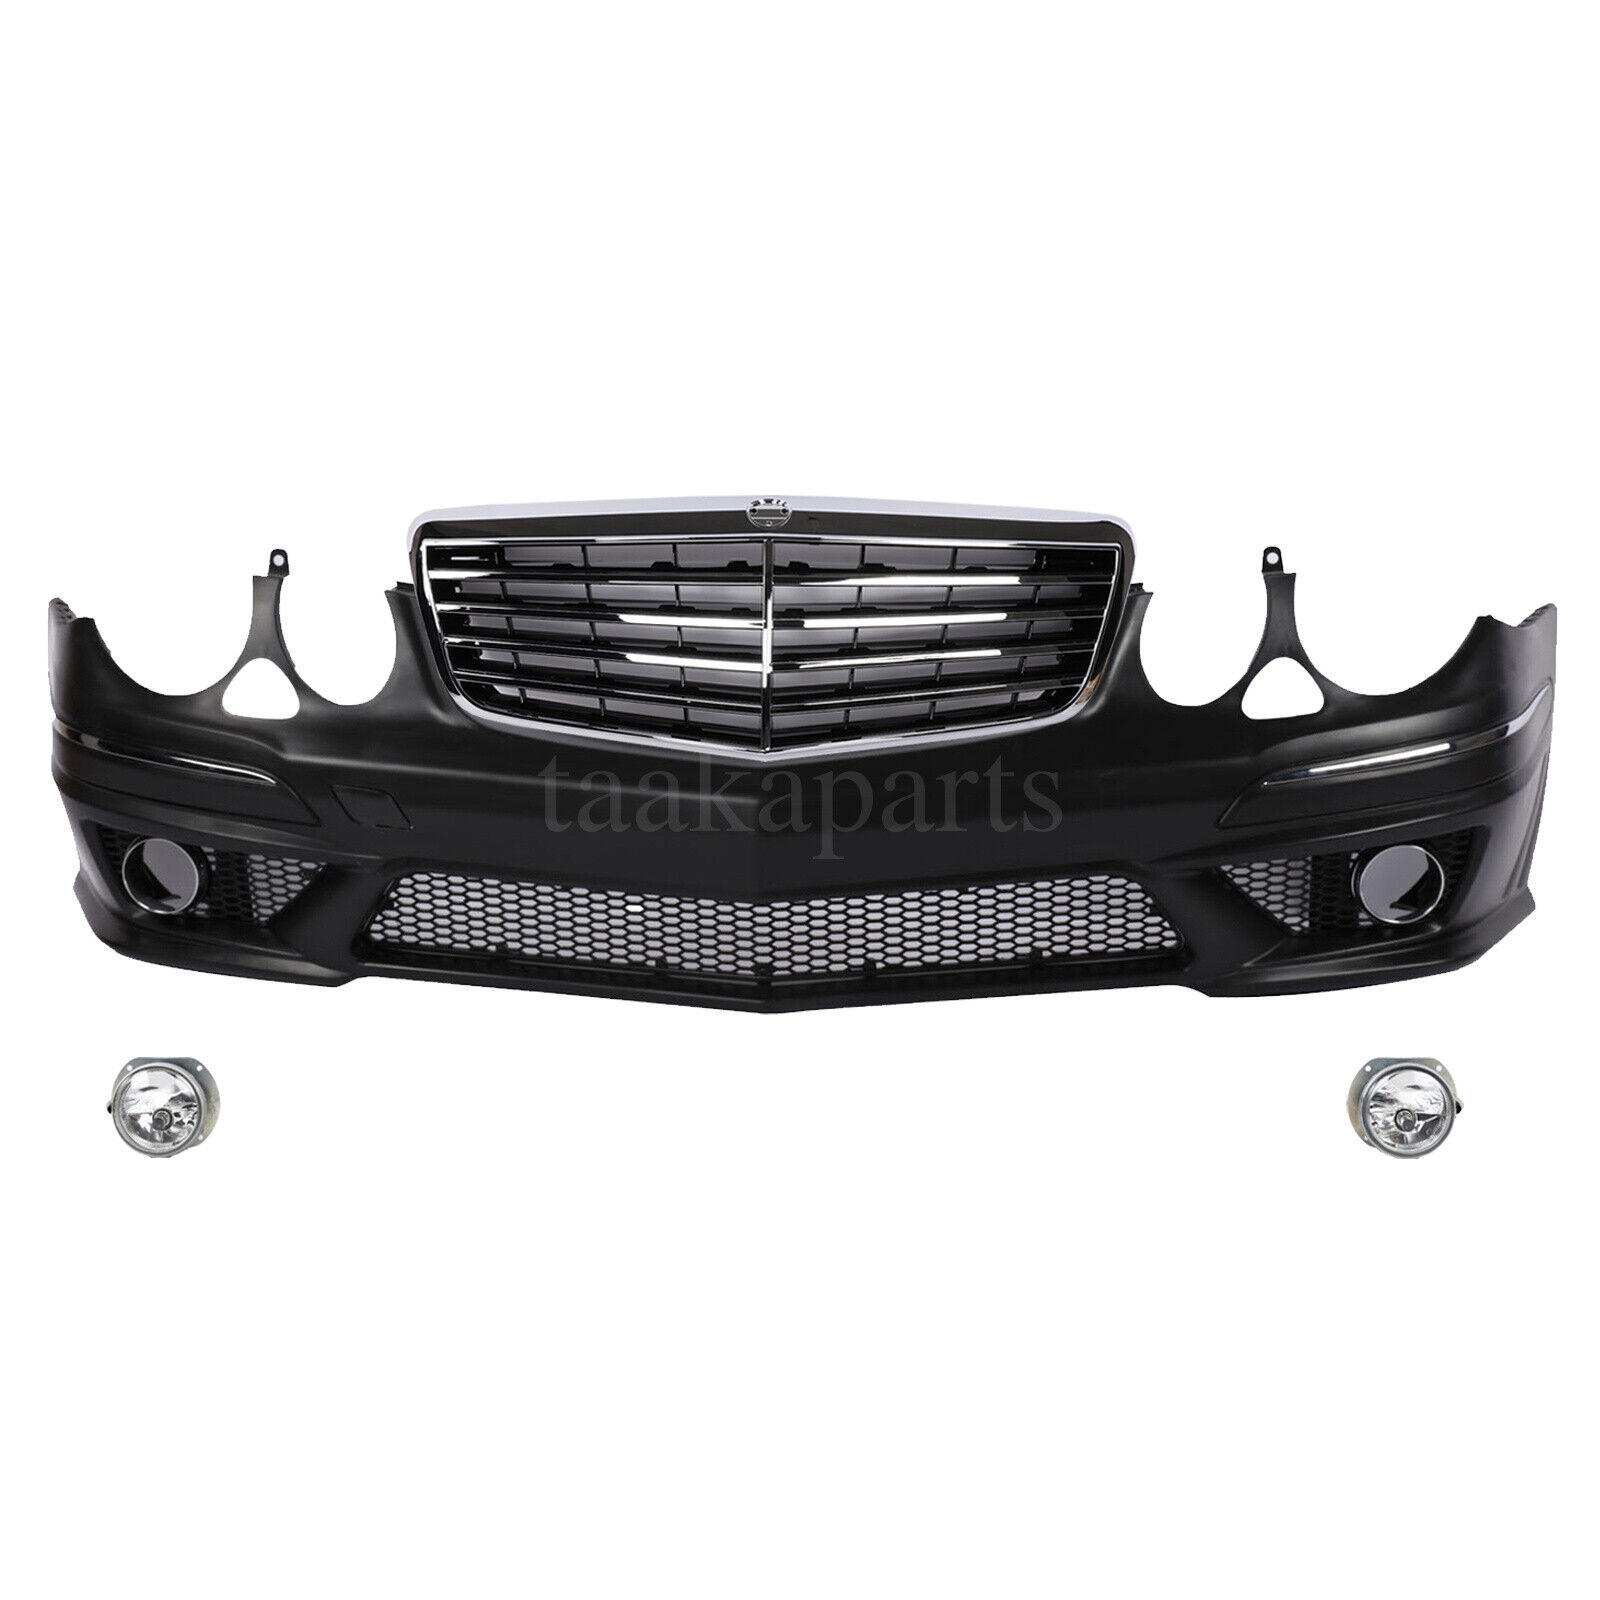 E63 Amg Style Front Bumper W/Grill W/Fog lights for Mercedes Benz E-Class 03-09